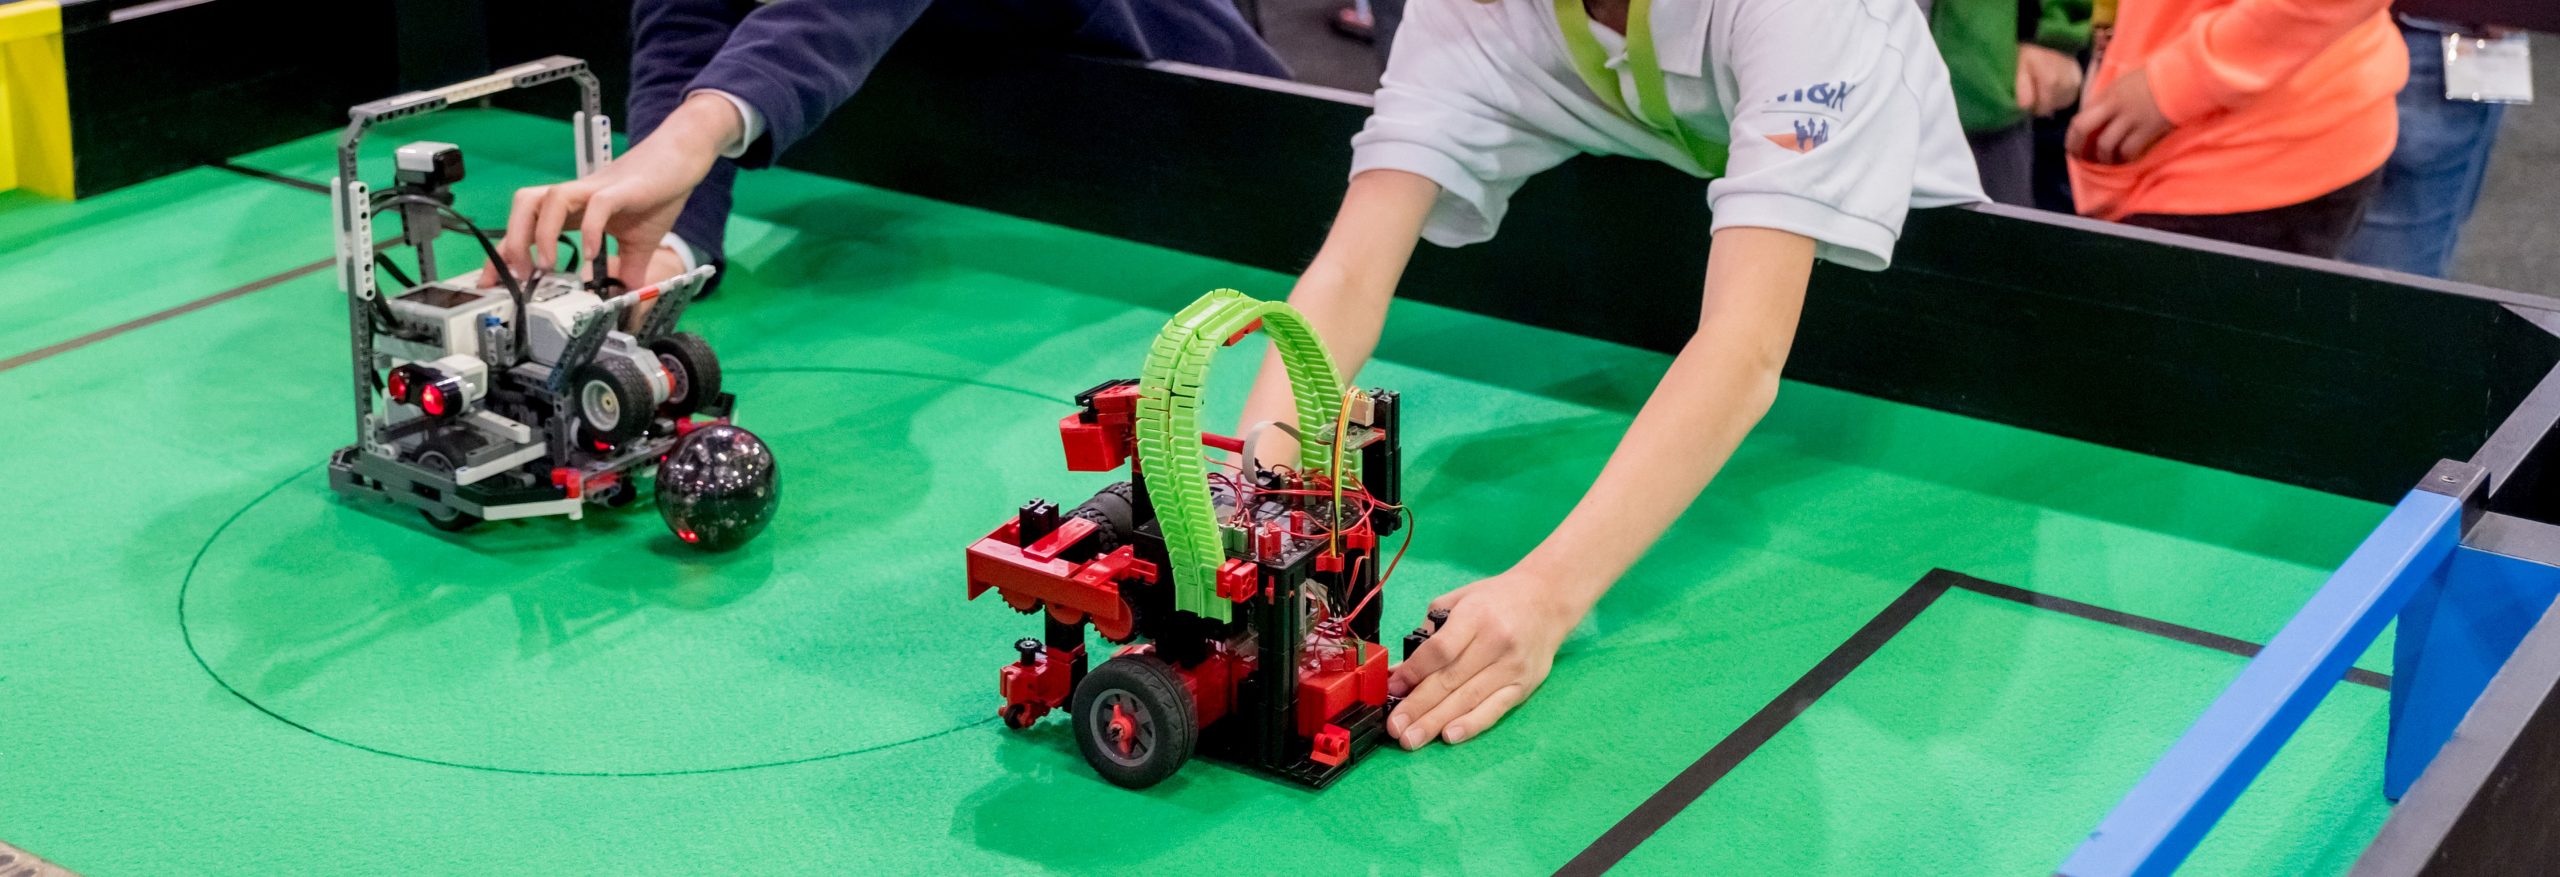 Two teams with one LWL robot each will compete using an IR ball on RCJ Soccer fields without the out-area. There is no need for using camera vision or line detection. Photo: Andreas Lander